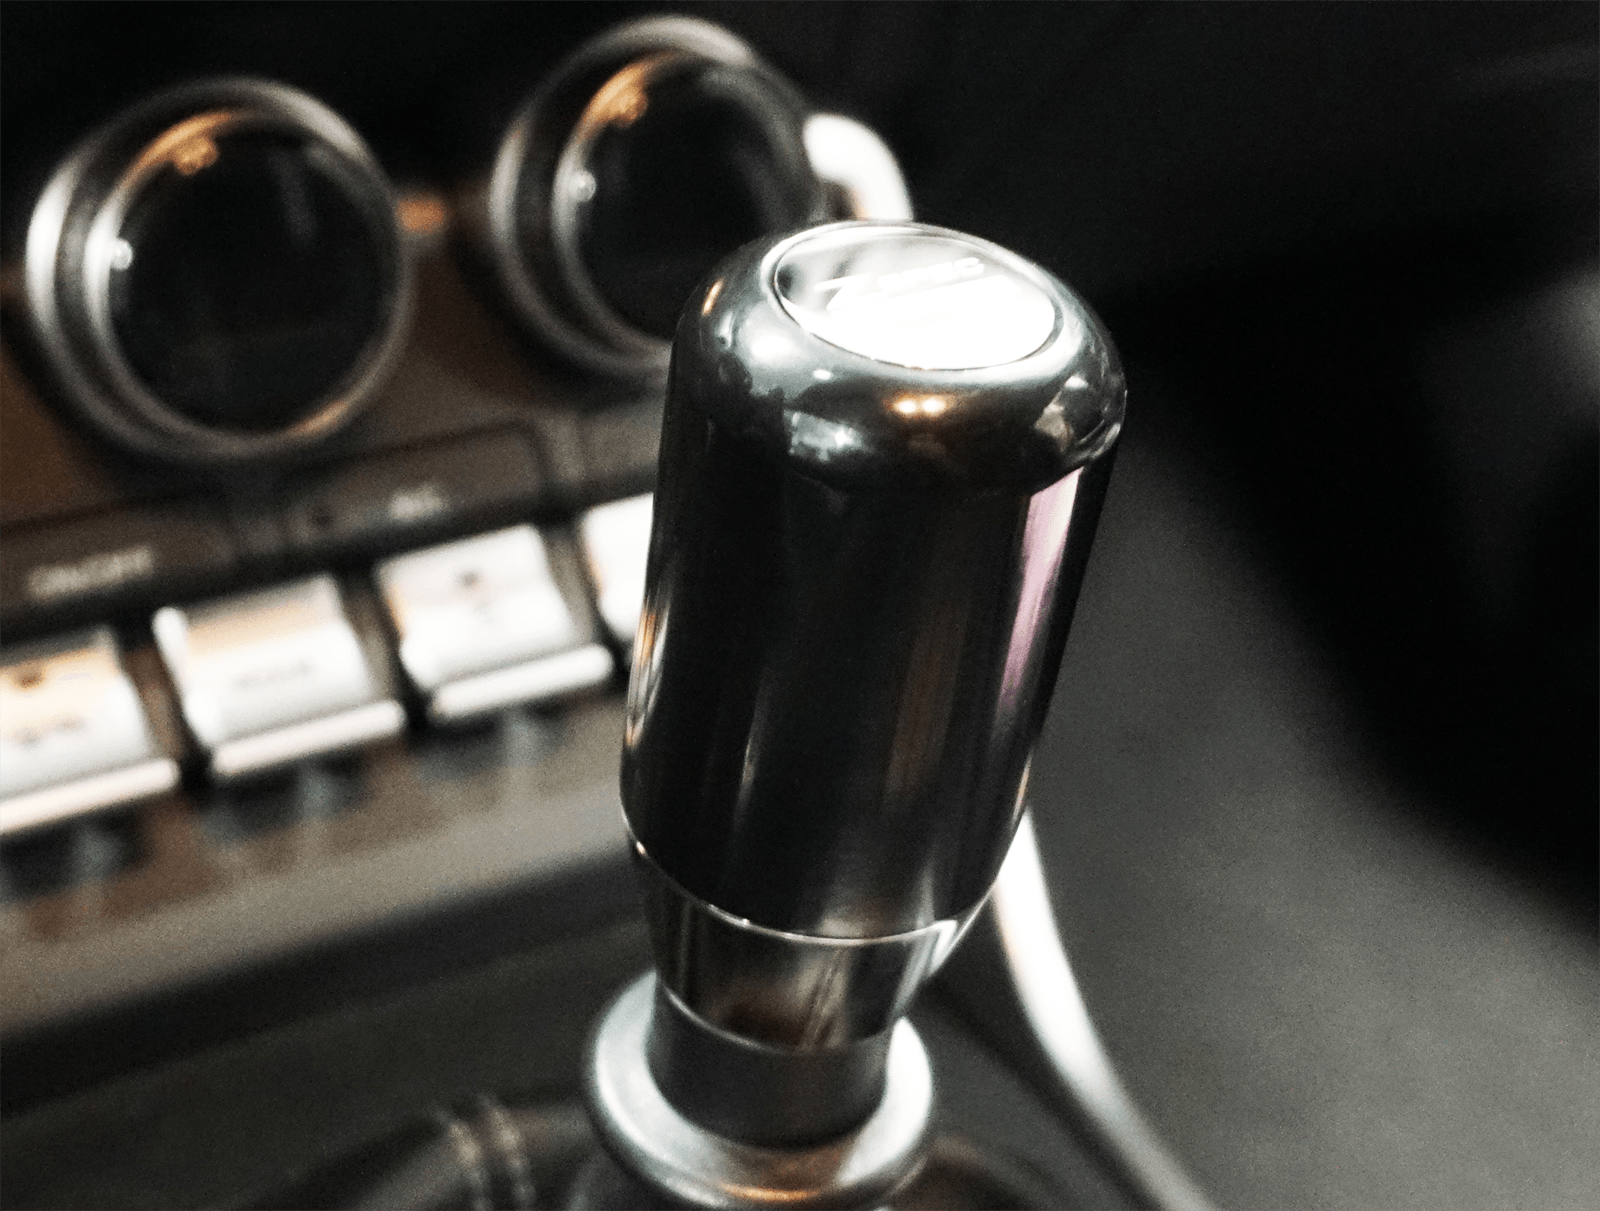 ZSPEC Shift Knob M10-1.5 Delrin & Stainless 4-Speed Shift Pattern  Manual  Interior Performance Upgrade Accessory Dress Up Bolts Fasteners Hardware Matters SUS304 Black Red Blue White Car Auto Vehicle